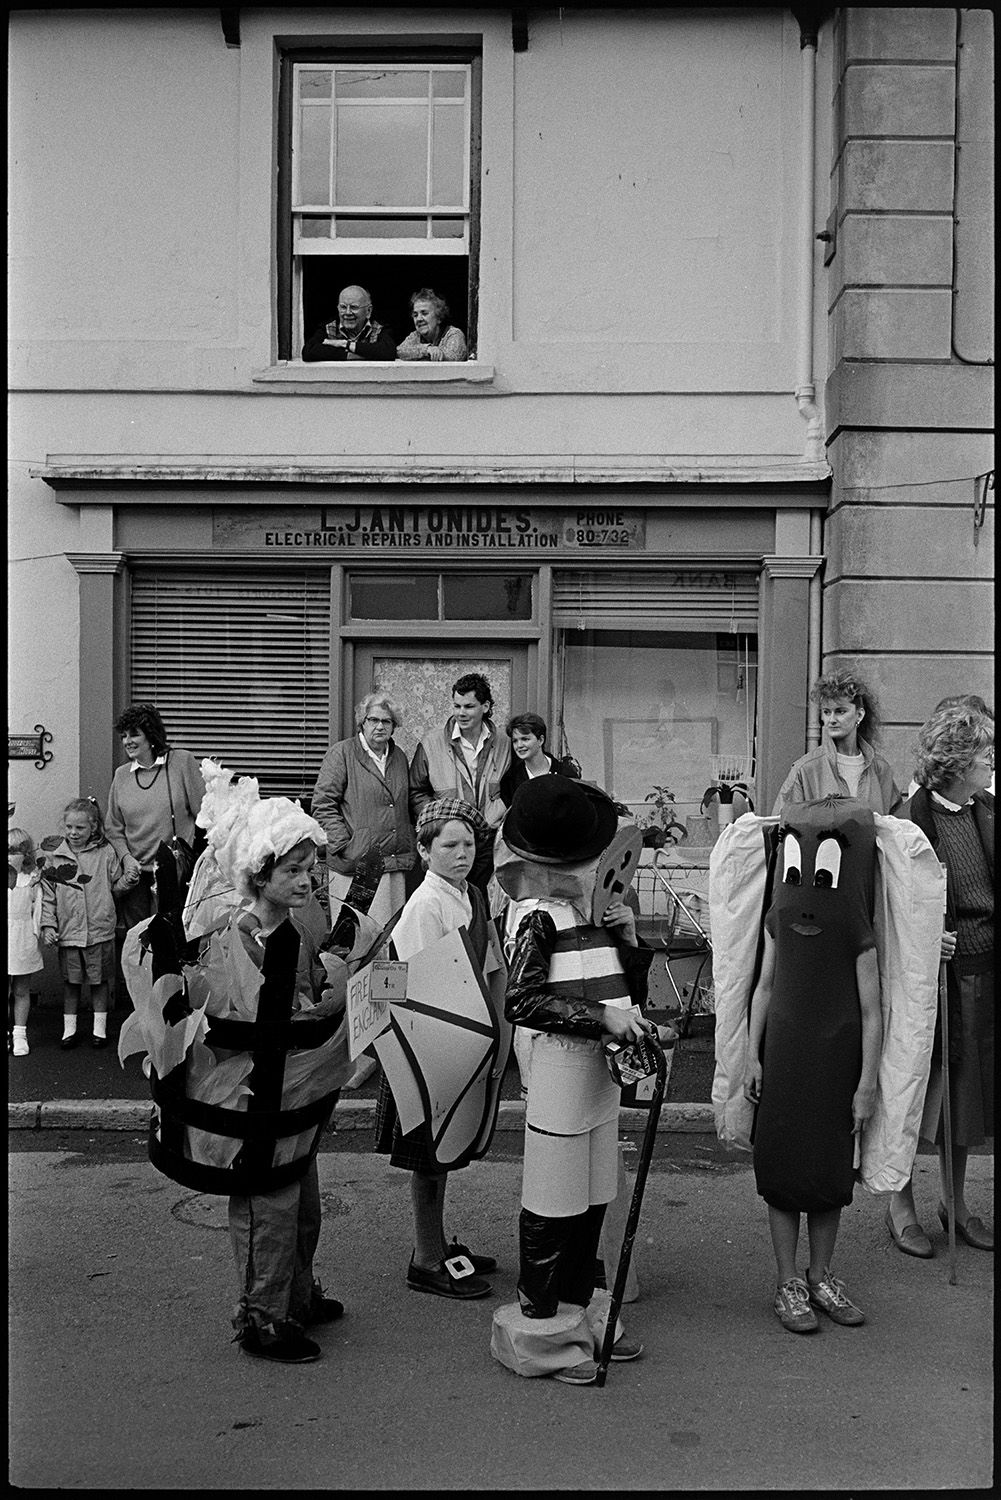 Village fair, fancy dress, crowd of onlookers, sack race. 
[Children in fancy dress at Chulmleigh Fair. One child is dressed as a hot dog and another is a beacon on fire. People are watching the fancy dress parade from the side of the street, outside the shop front od L J Antunides electrical repair shop, and a first floor window.]